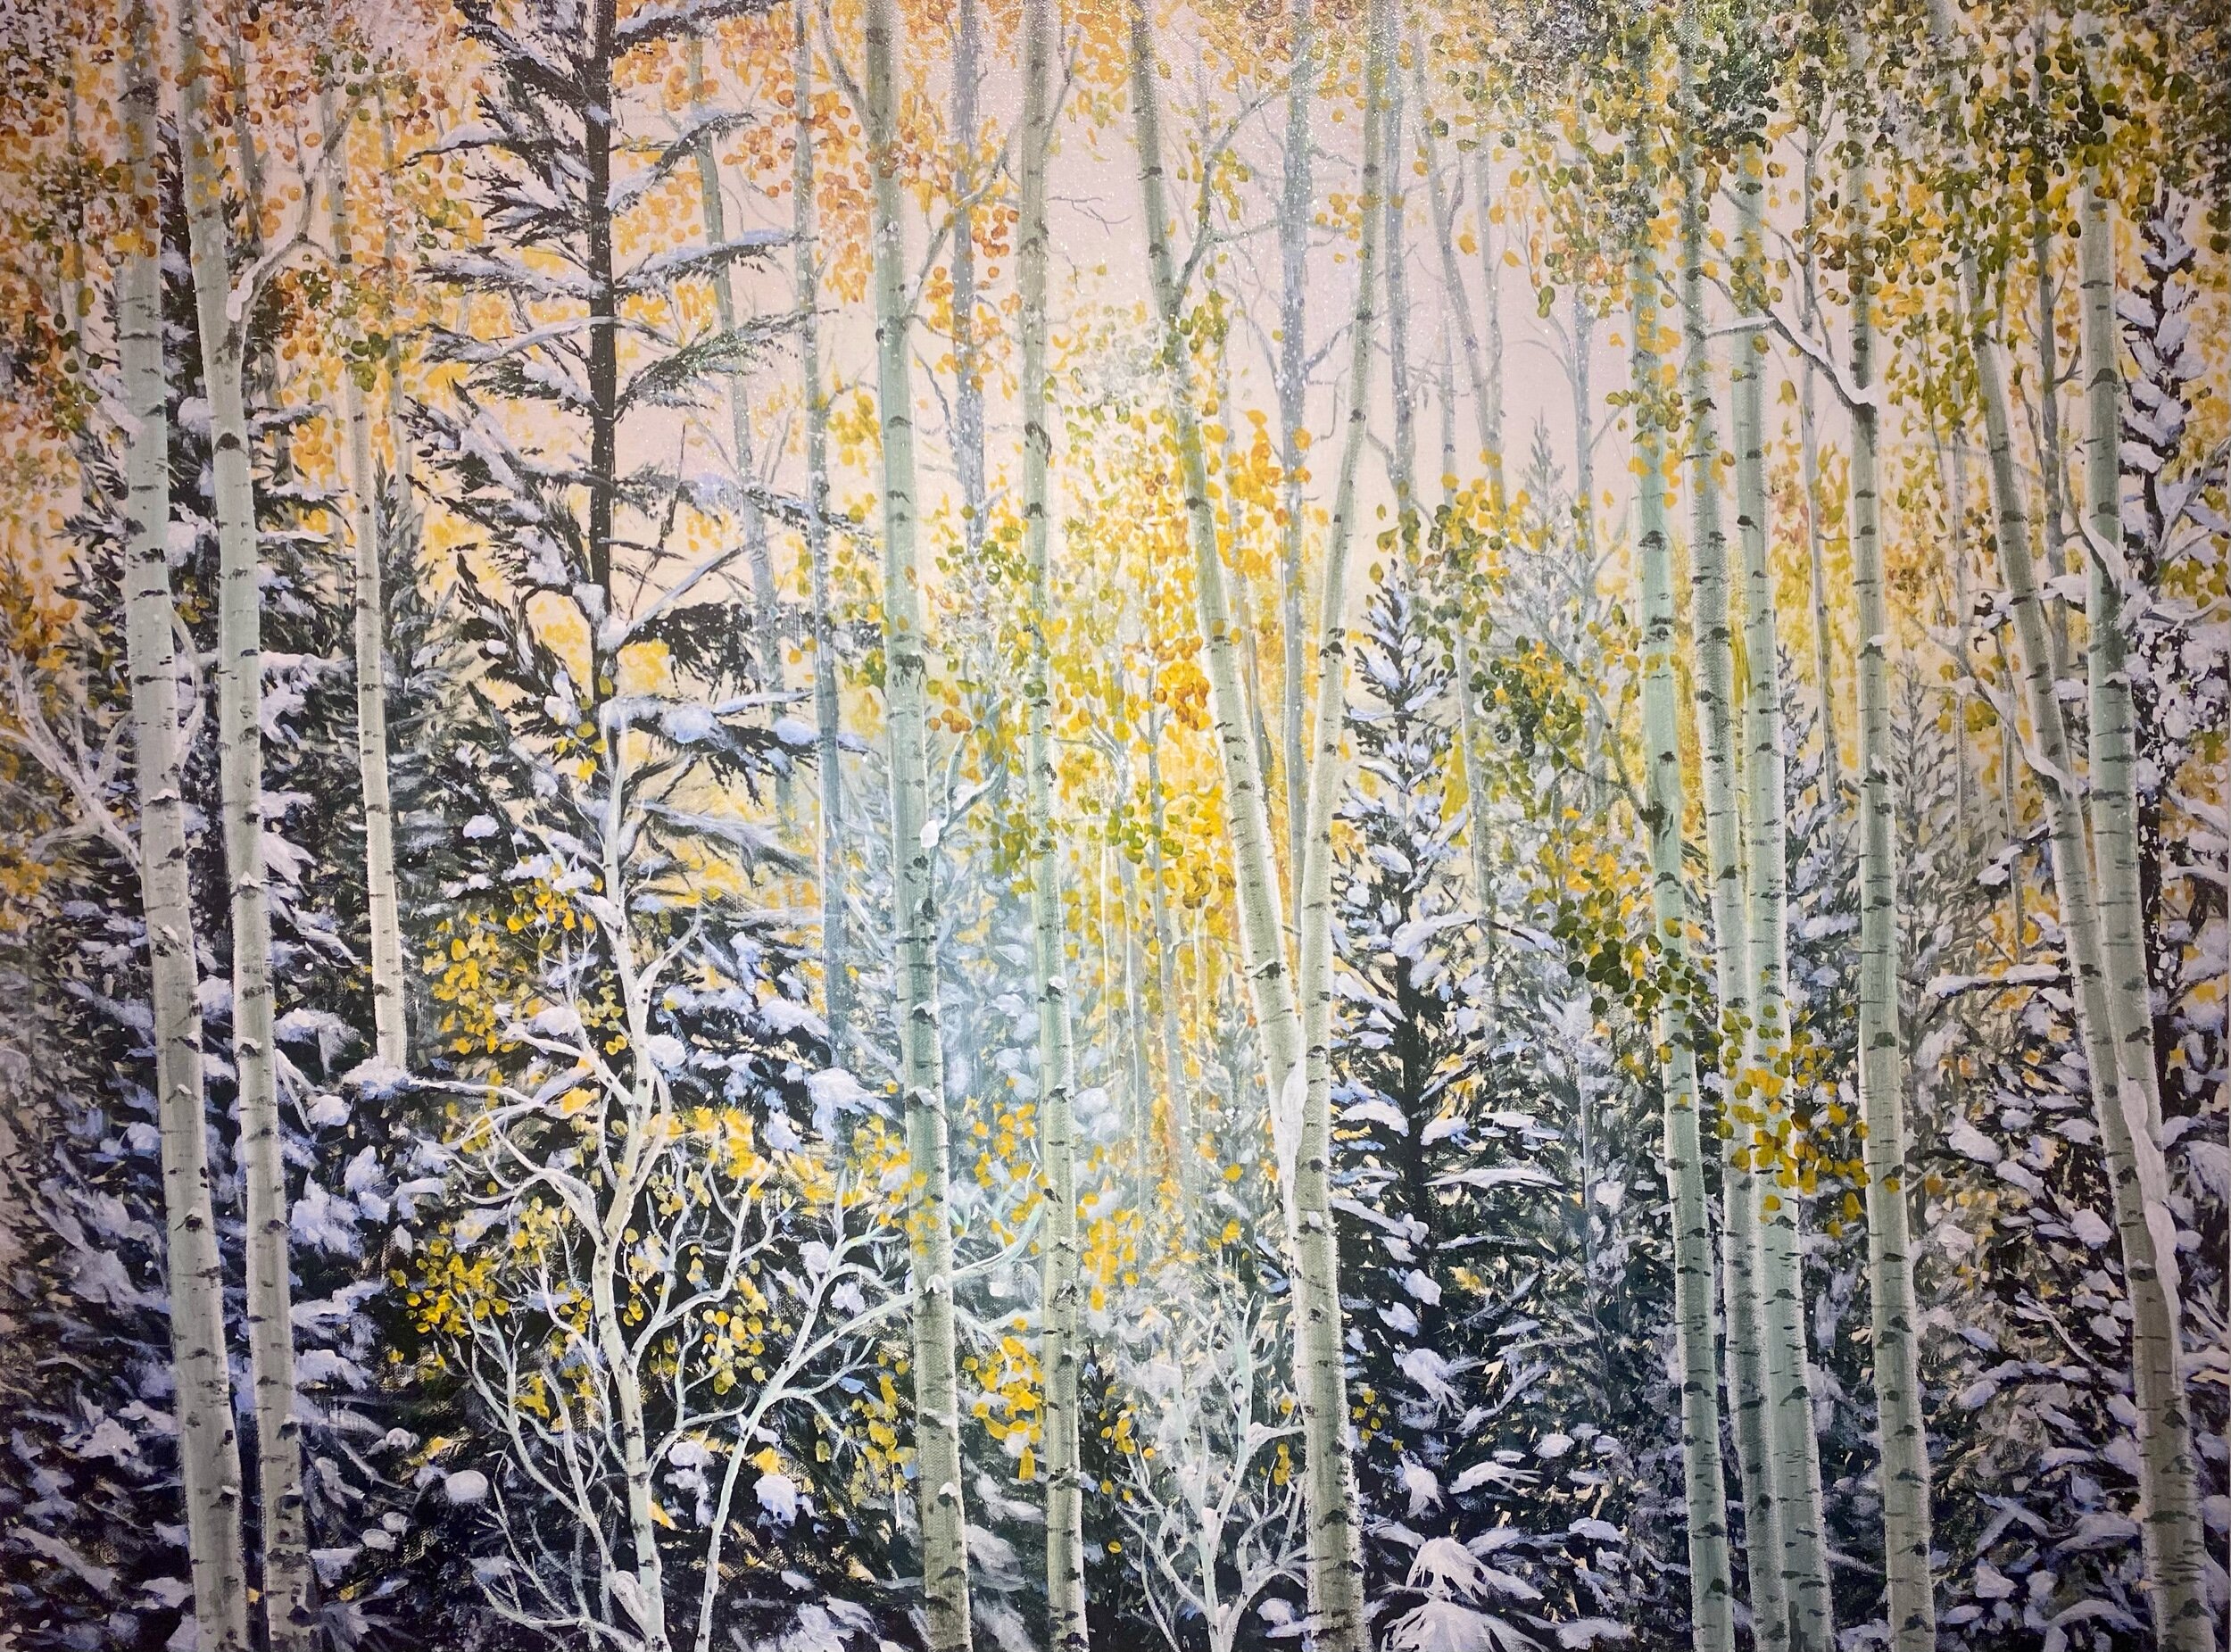 30x40 “The First Snow”